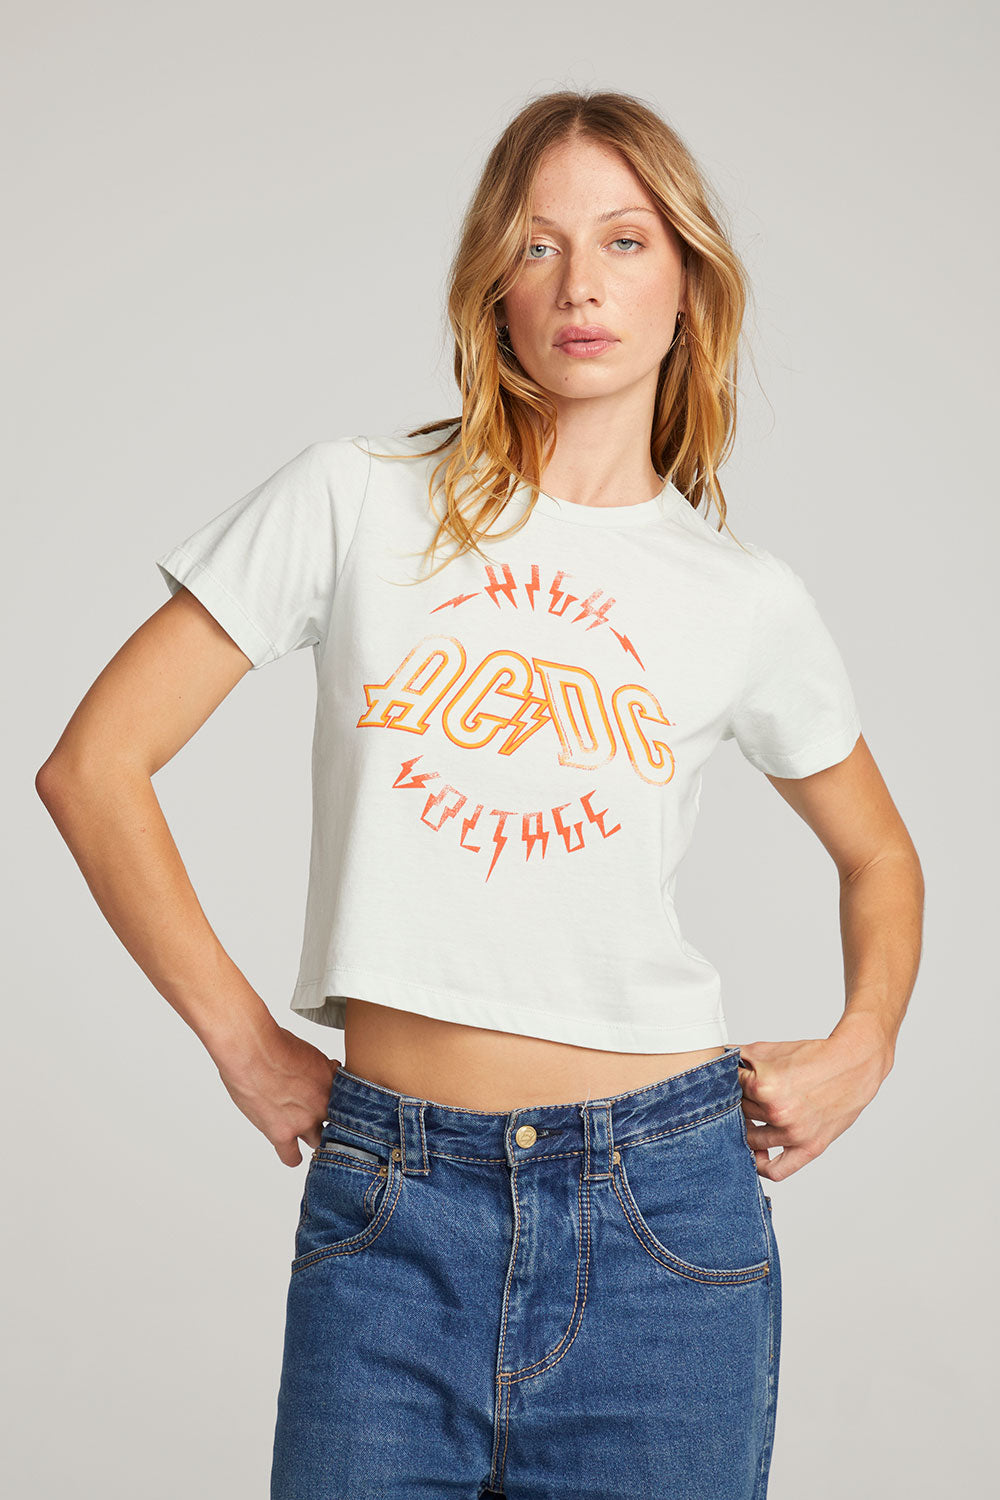 AC/DC High Voltage Tee WOMENS chaserbrand